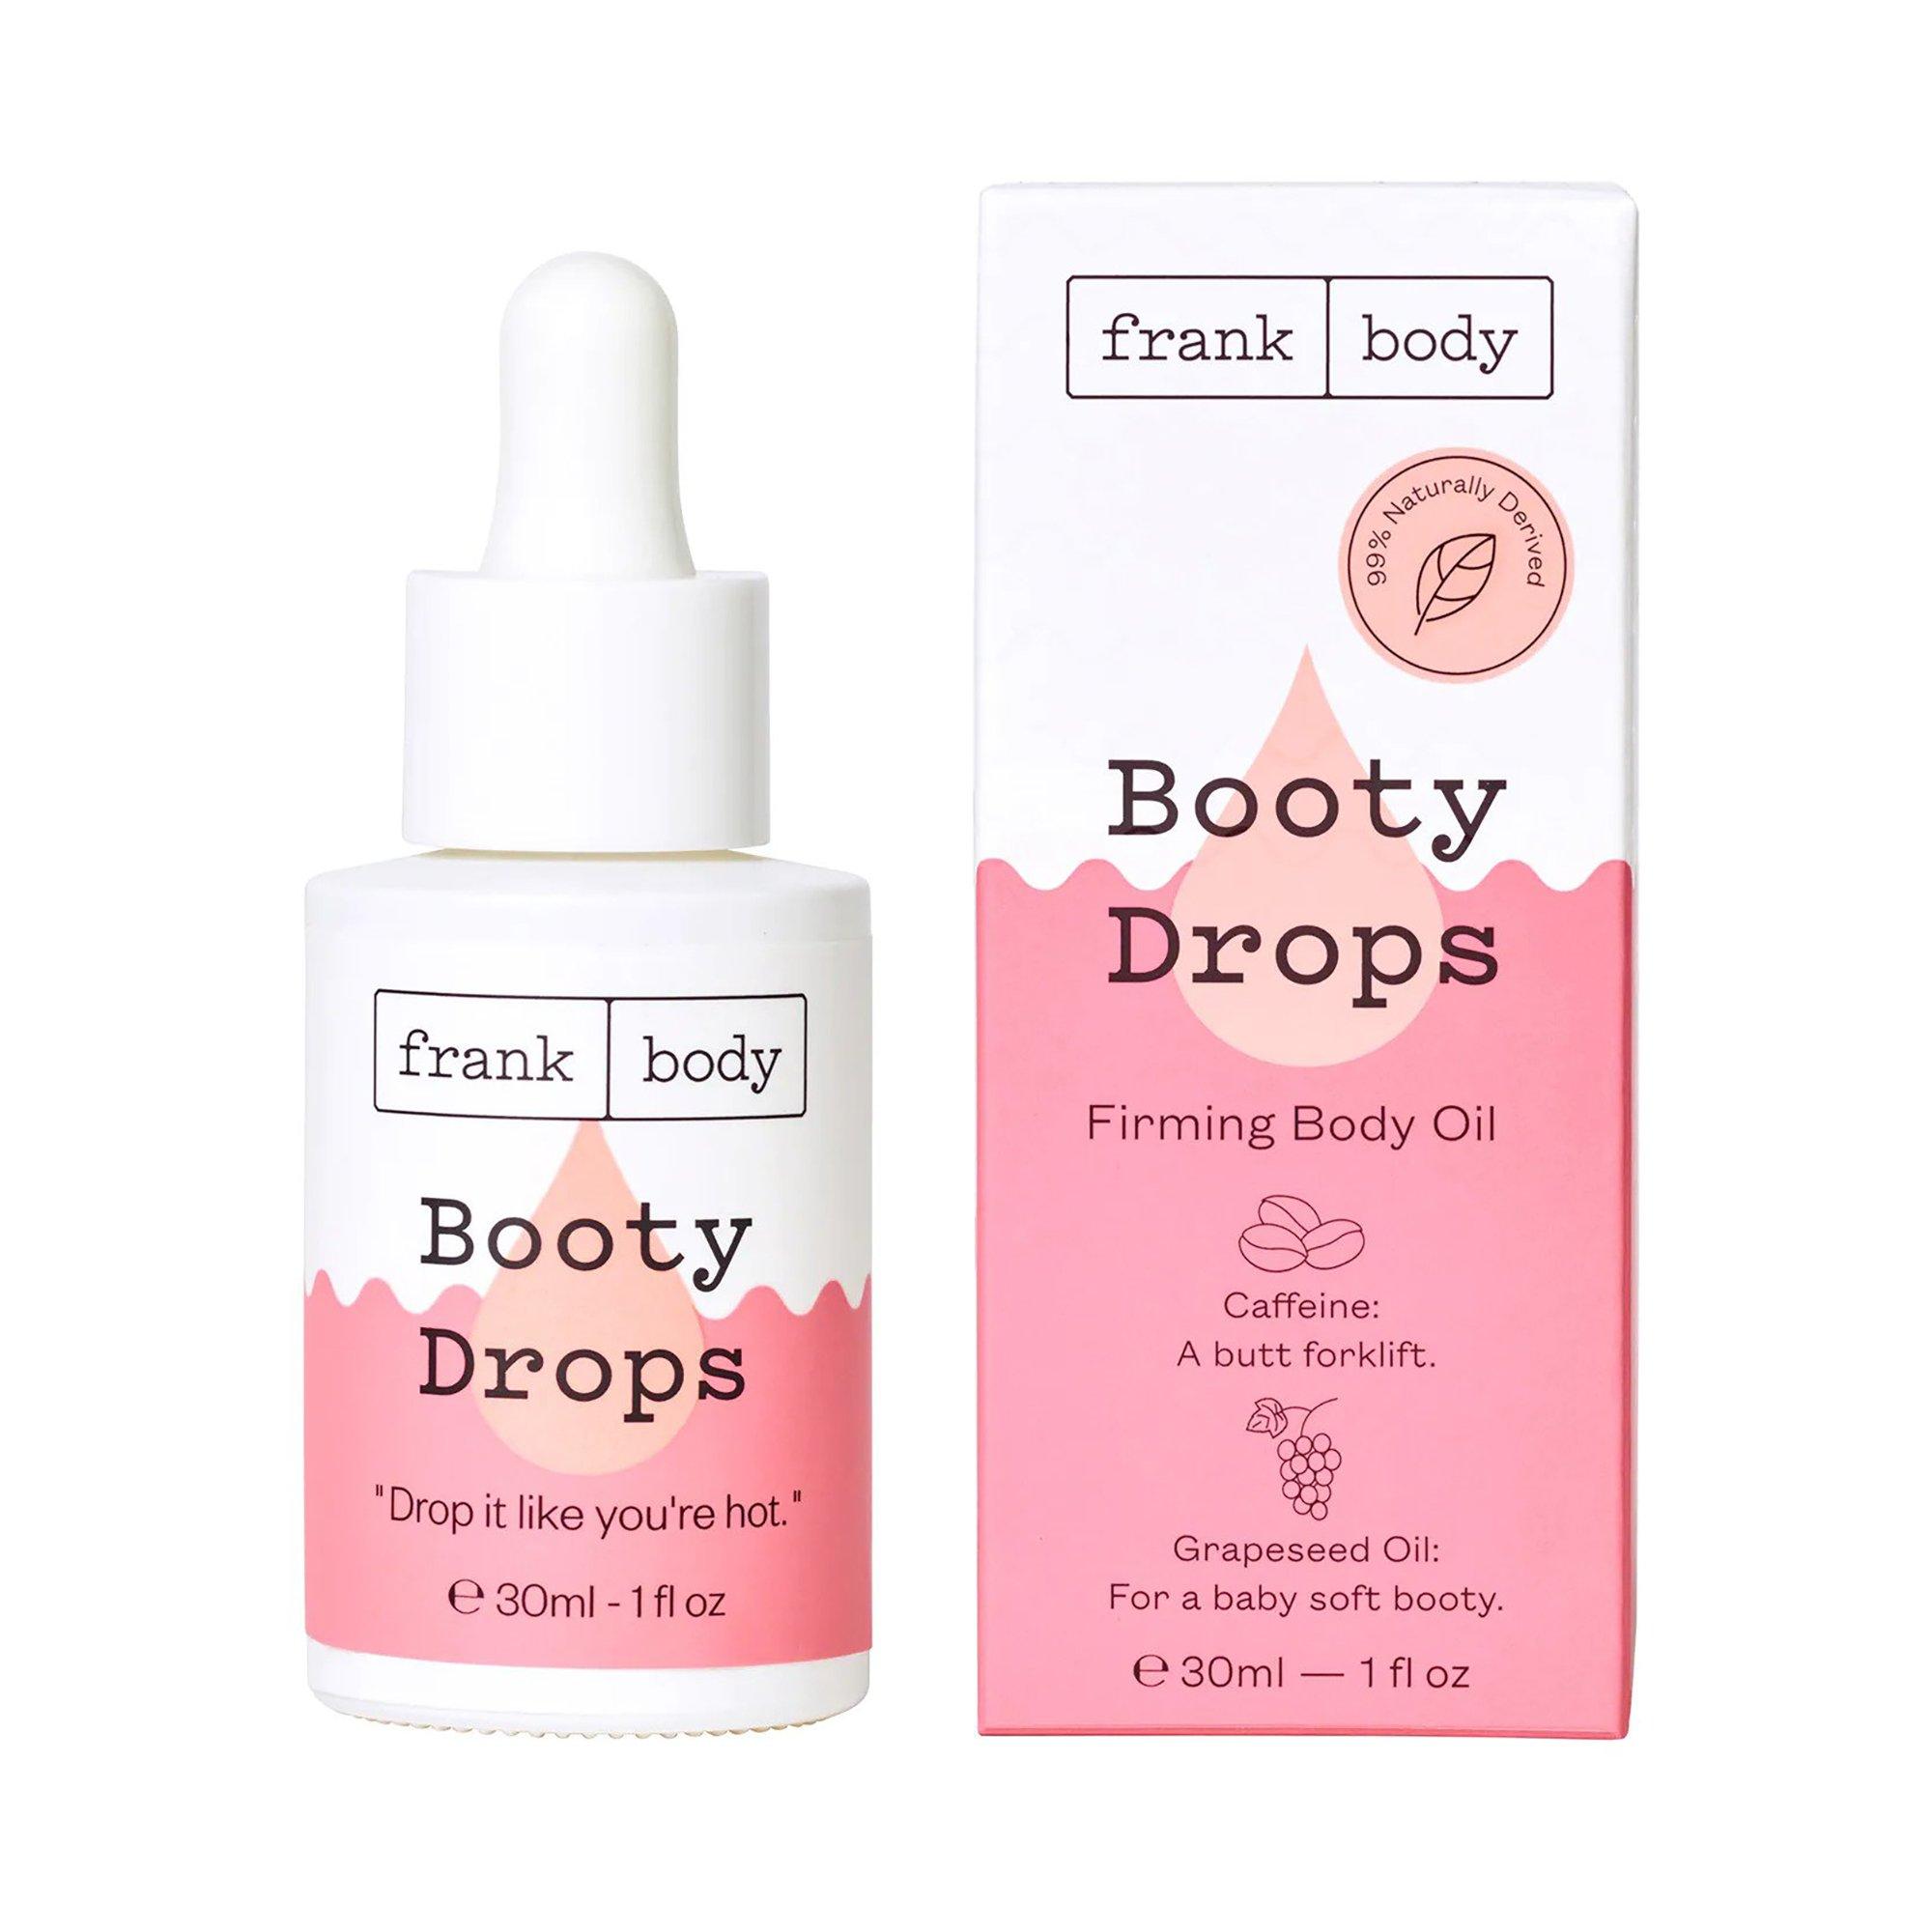 Image of frank body Booty Drops - 30ml